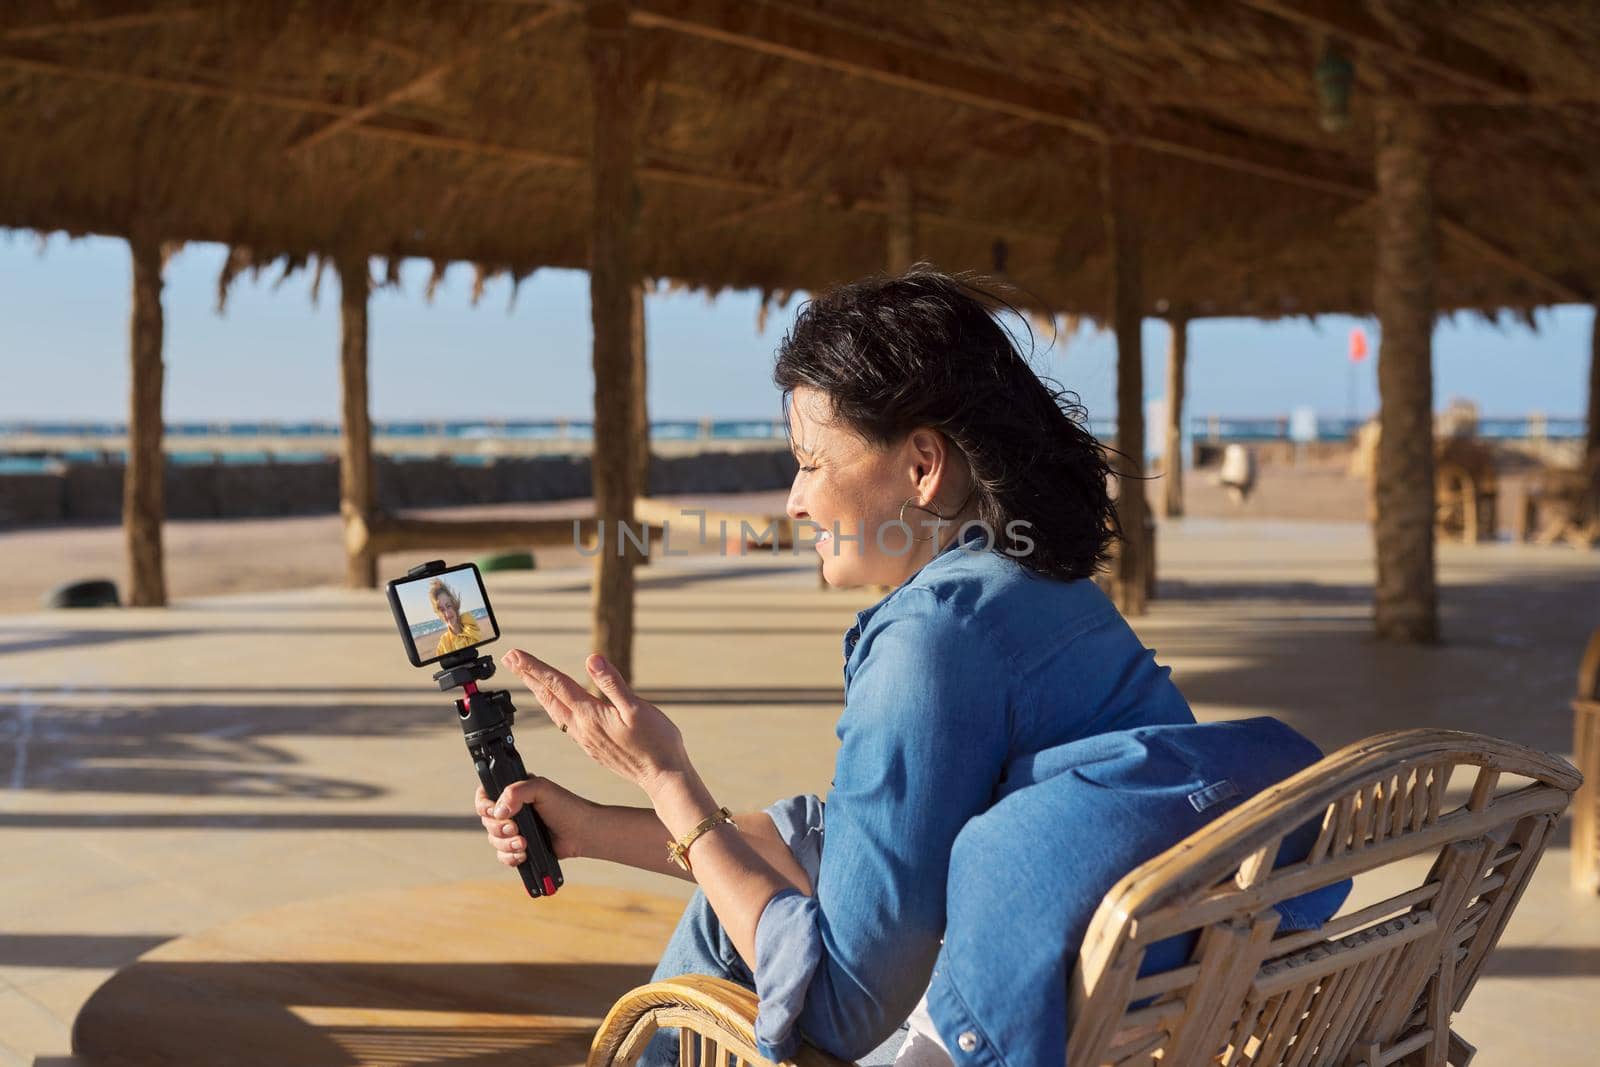 Woman at seaside resort in rattan chair talking to her female friend using video call on smartphone. Lifestyle, technology, telecommunications concept